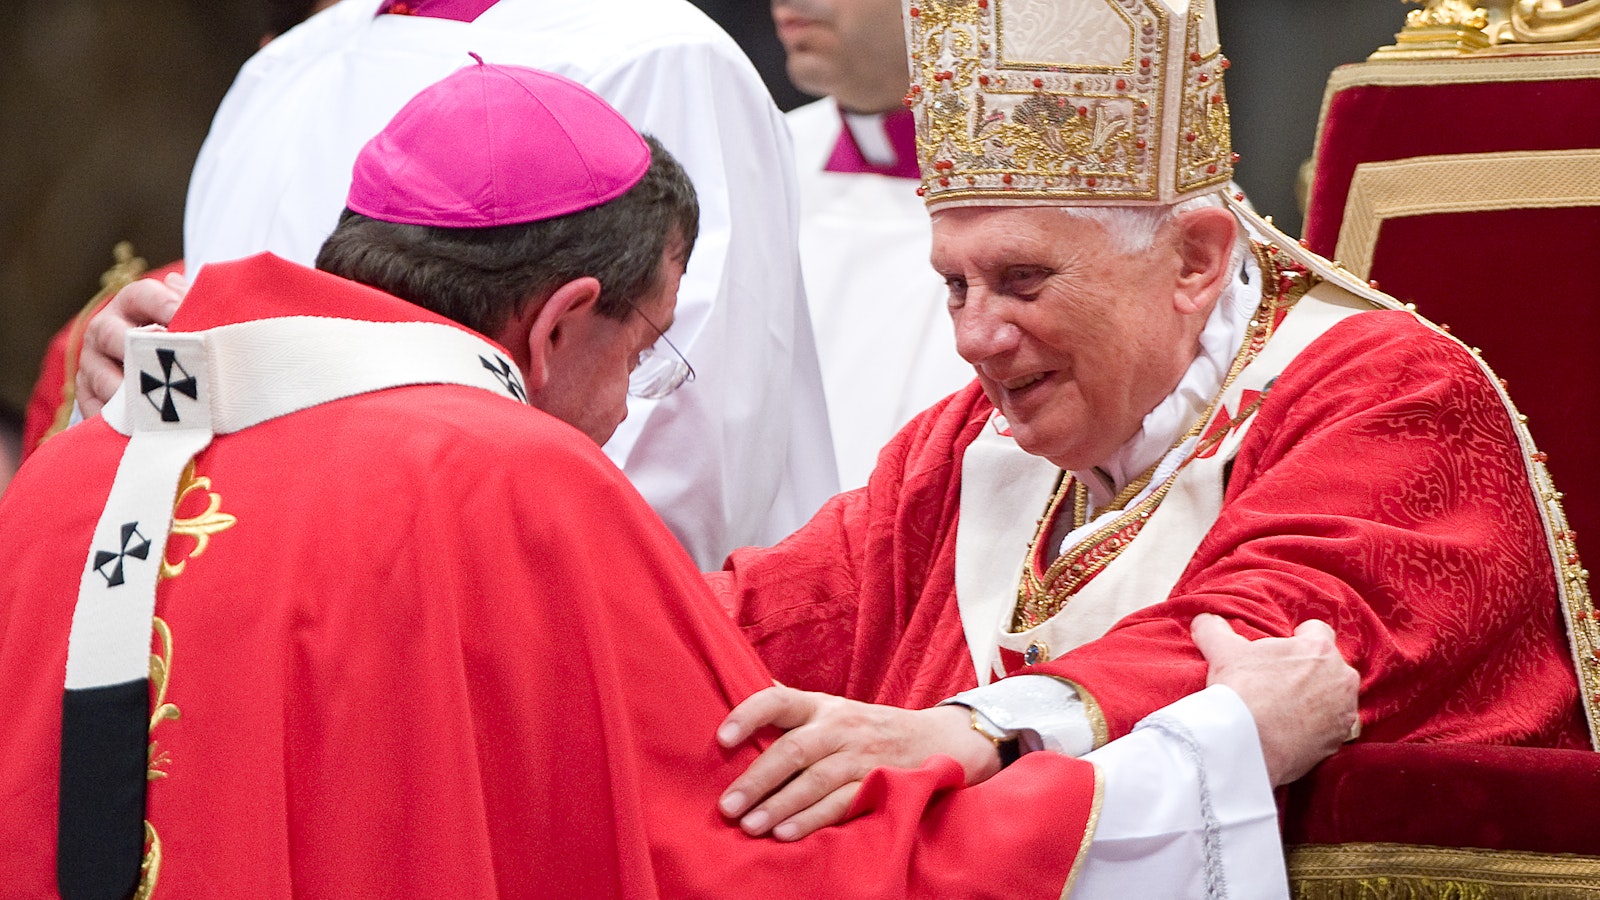 Pope Benedict XVI smiles as he says a word of encouragement to Archbishop Vigneron after bestowing upon him the pallium, a woolen band denoting his role as a shepherd, on June 29, 2009, at St. Peter's Basilica in Rome. (L'Osservatore Romano | CNS photo)